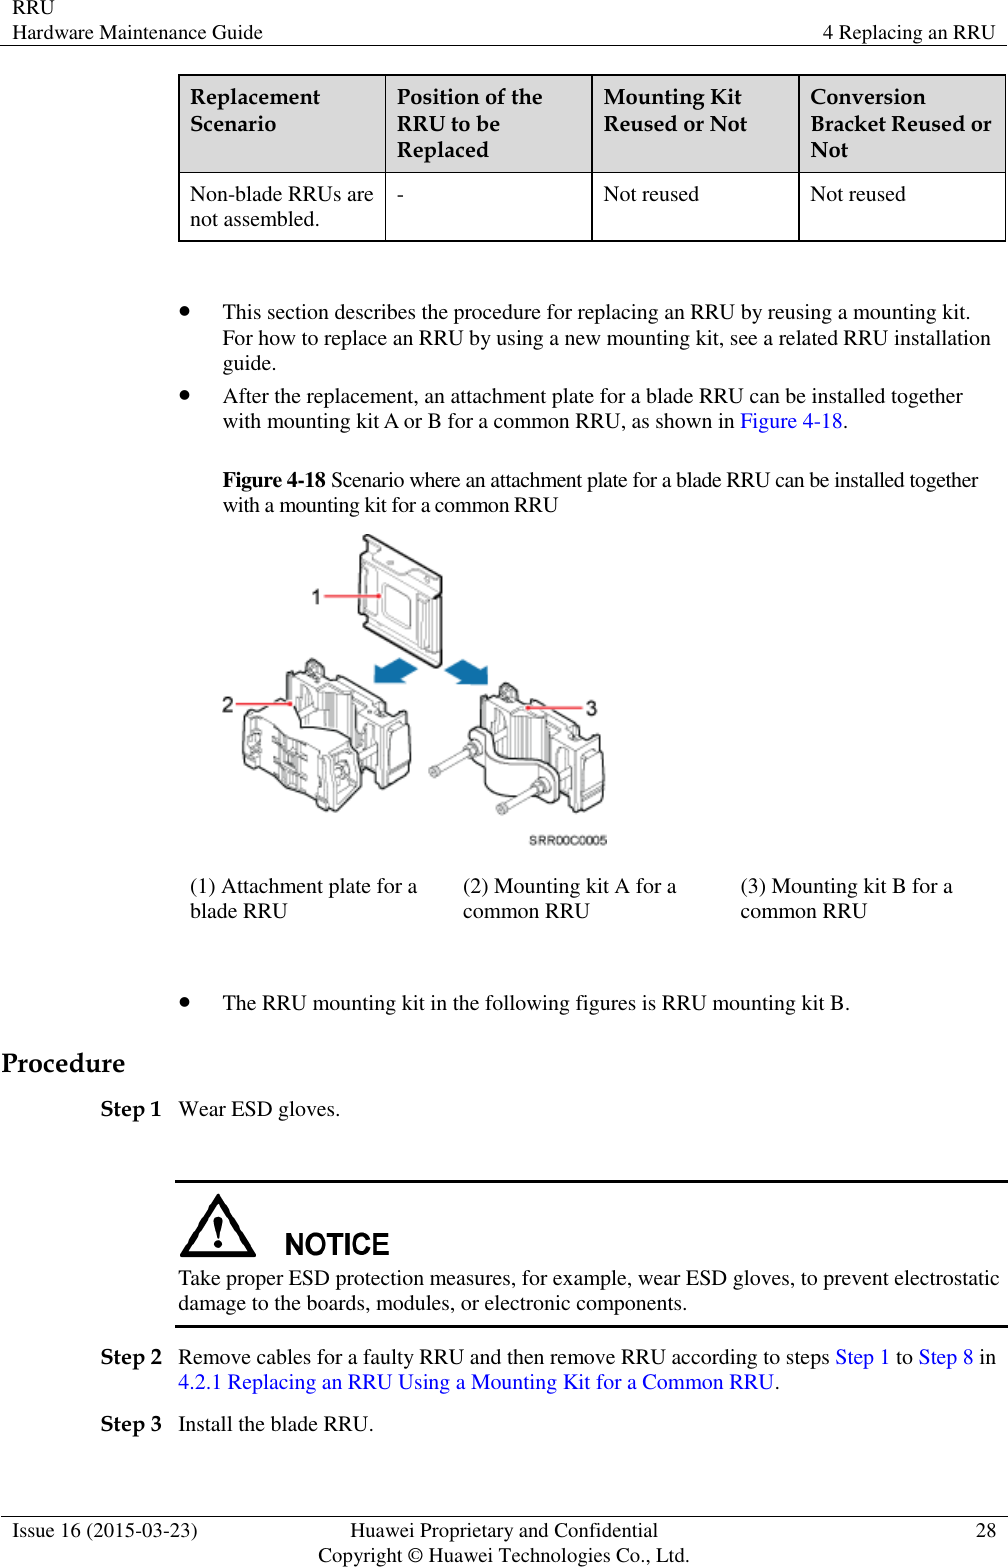 RRU Hardware Maintenance Guide 4 Replacing an RRU  Issue 16 (2015-03-23) Huawei Proprietary and Confidential                                     Copyright © Huawei Technologies Co., Ltd. 28  Replacement Scenario Position of the RRU to be Replaced Mounting Kit Reused or Not Conversion Bracket Reused or Not Non-blade RRUs are not assembled. - Not reused Not reused   This section describes the procedure for replacing an RRU by reusing a mounting kit. For how to replace an RRU by using a new mounting kit, see a related RRU installation guide.  After the replacement, an attachment plate for a blade RRU can be installed together with mounting kit A or B for a common RRU, as shown in Figure 4-18. Figure 4-18 Scenario where an attachment plate for a blade RRU can be installed together with a mounting kit for a common RRU  (1) Attachment plate for a blade RRU   (2) Mounting kit A for a common RRU (3) Mounting kit B for a common RRU   The RRU mounting kit in the following figures is RRU mounting kit B. Procedure Step 1 Wear ESD gloves.   Take proper ESD protection measures, for example, wear ESD gloves, to prevent electrostatic damage to the boards, modules, or electronic components. Step 2 Remove cables for a faulty RRU and then remove RRU according to steps Step 1 to Step 8 in 4.2.1 Replacing an RRU Using a Mounting Kit for a Common RRU. Step 3 Install the blade RRU. 